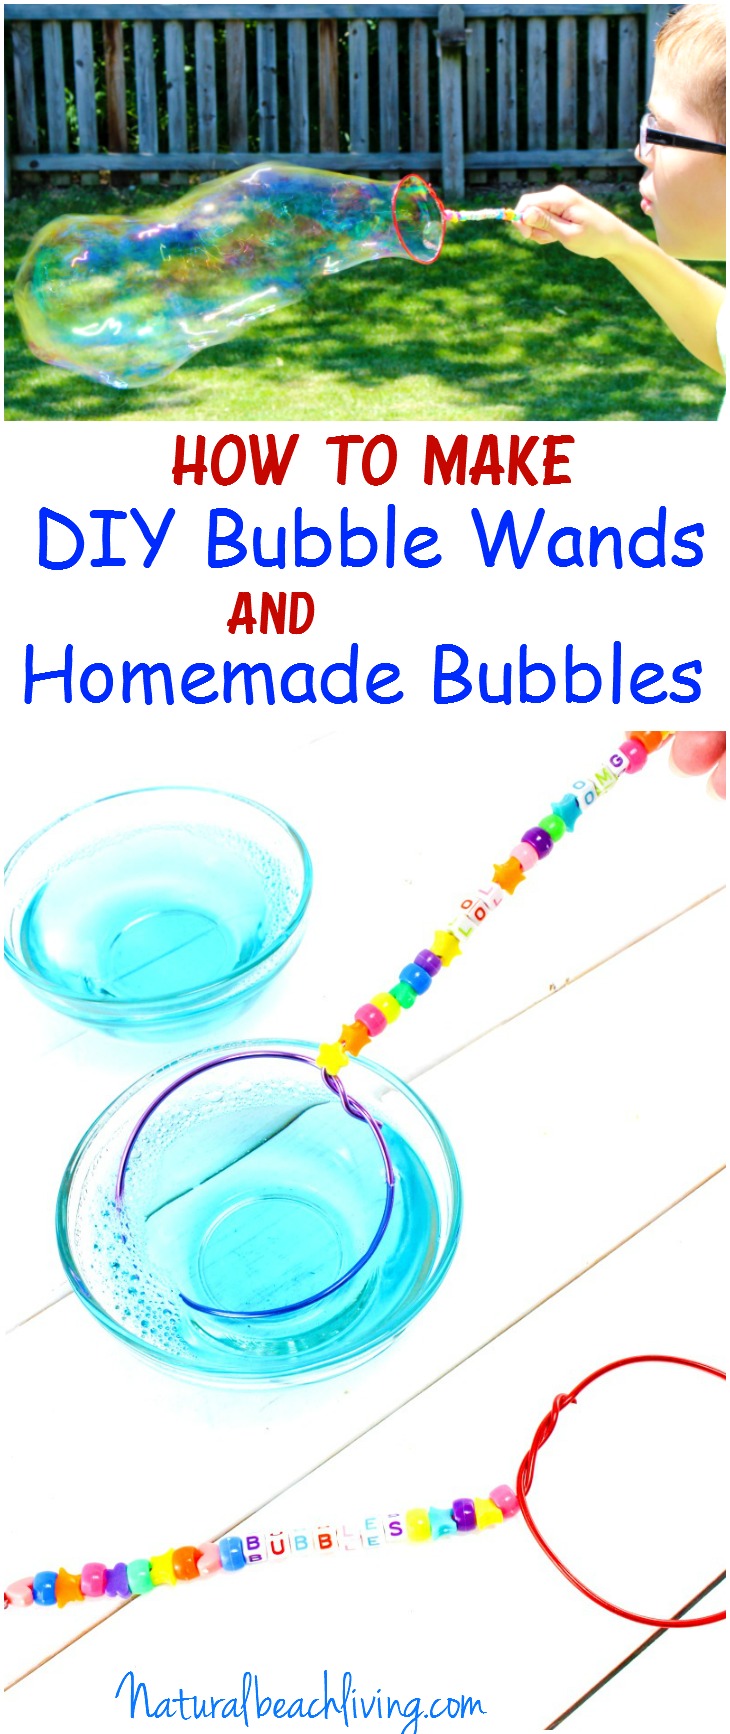 How to Make DIY Bubble Wands & Homemade Bubbles, These Easy DIY Wire Bubble Wands are a fun summer craft idea and Summer Activity for Kids, learn how to make bubbles with only 3 ingredients and The Best Homemade Bubble Wand Ideas your kids will love. 